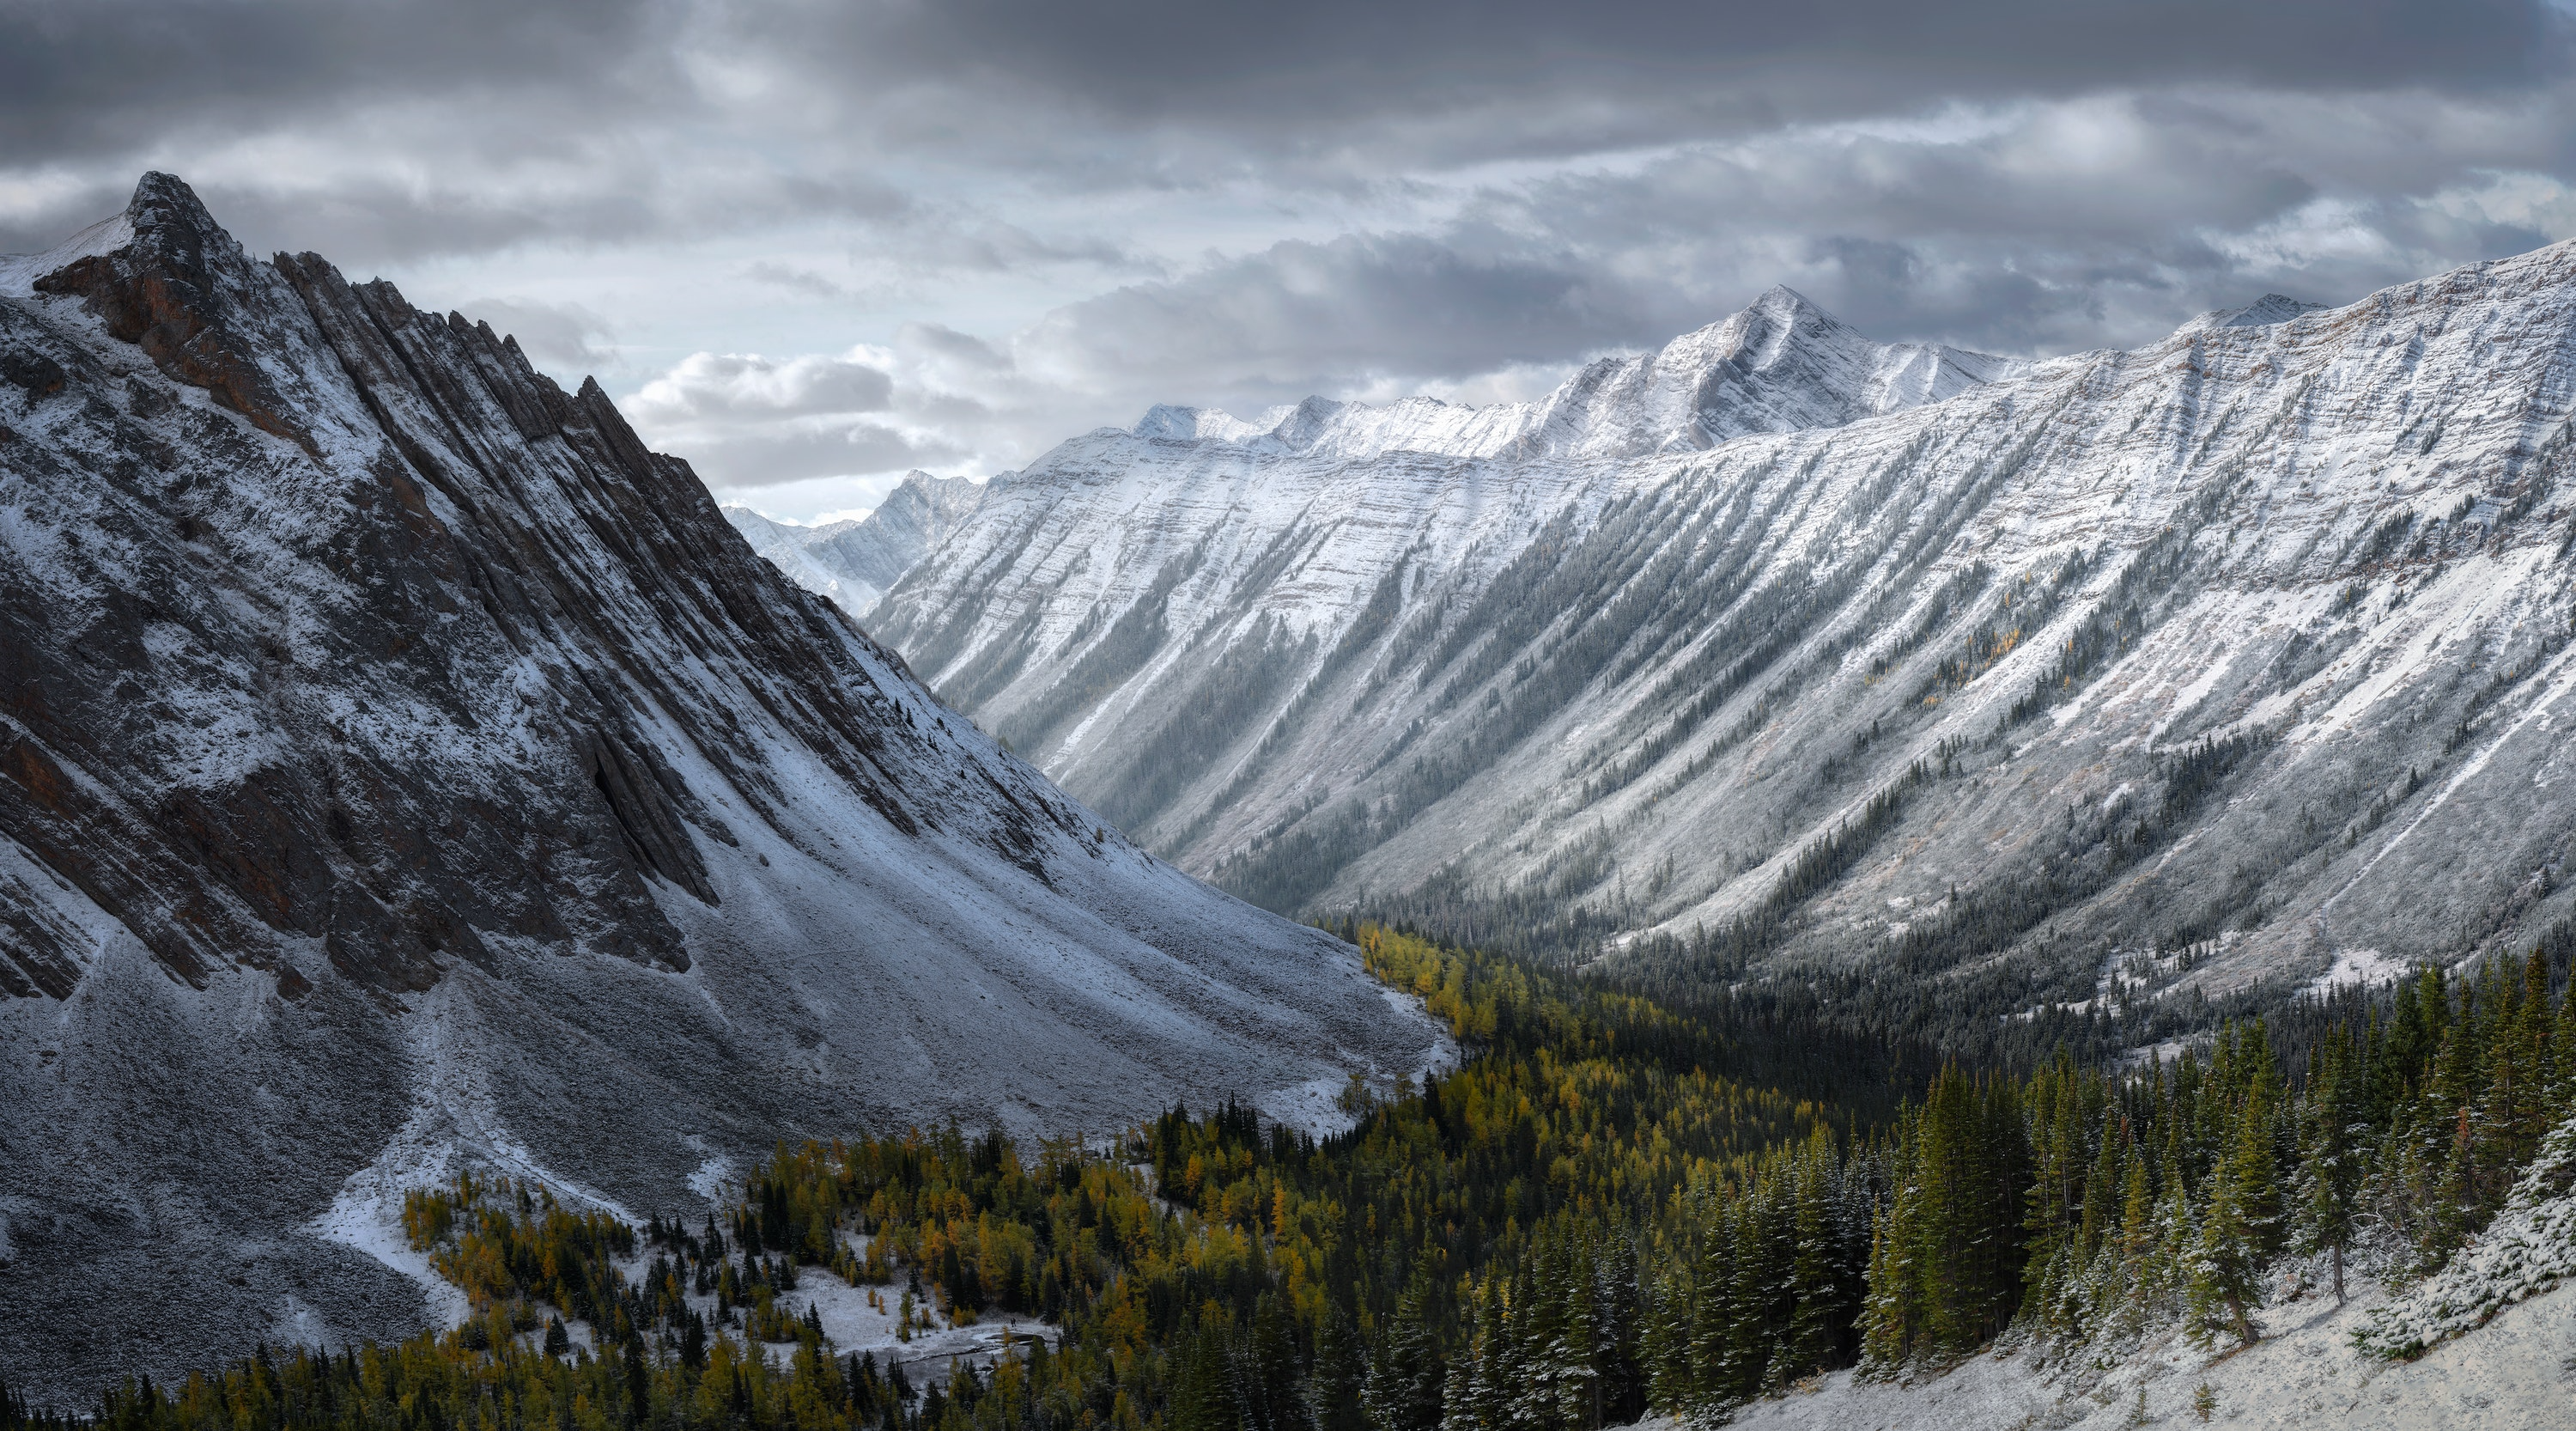 General 3000x1666 photography landscape nature mountains forest trees snow clouds sky Canada